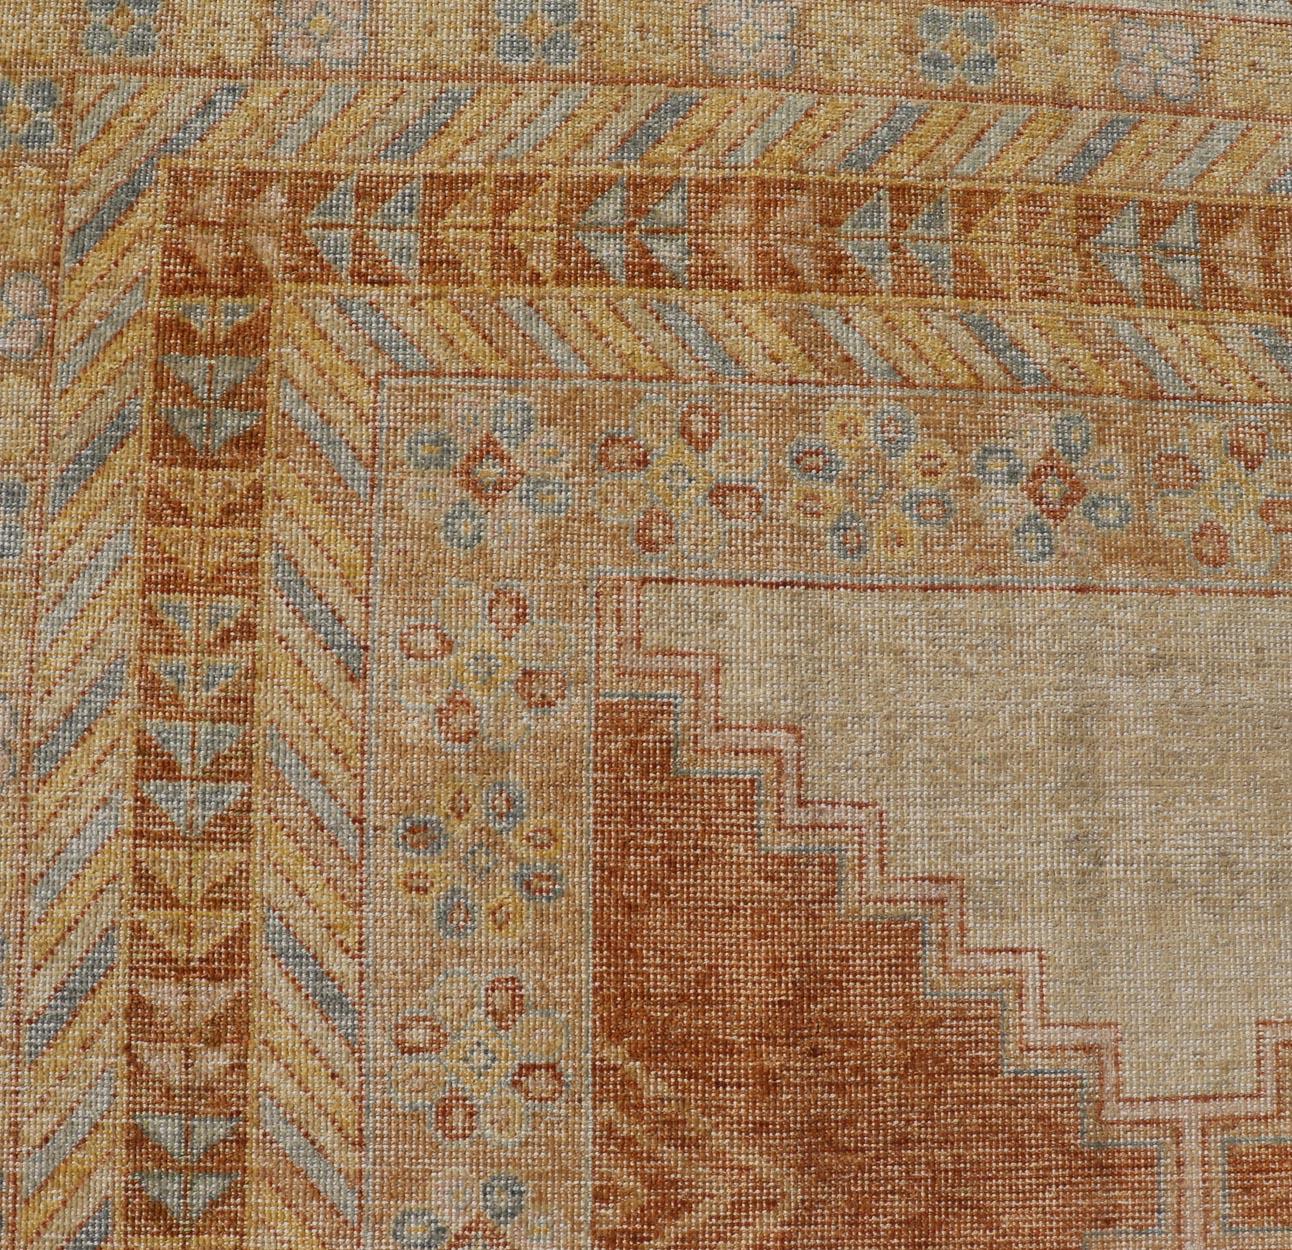  Distressed Modern Khotan Design Rug with Diamond & Geometric Pattern Khotan Design distressed Rug with In Ivory, Burnt Orange, light green, light blue and yellow colors. Keivan Woven Arts/ rug RJK-24848-JPR-011-01 country of origin / type: India /